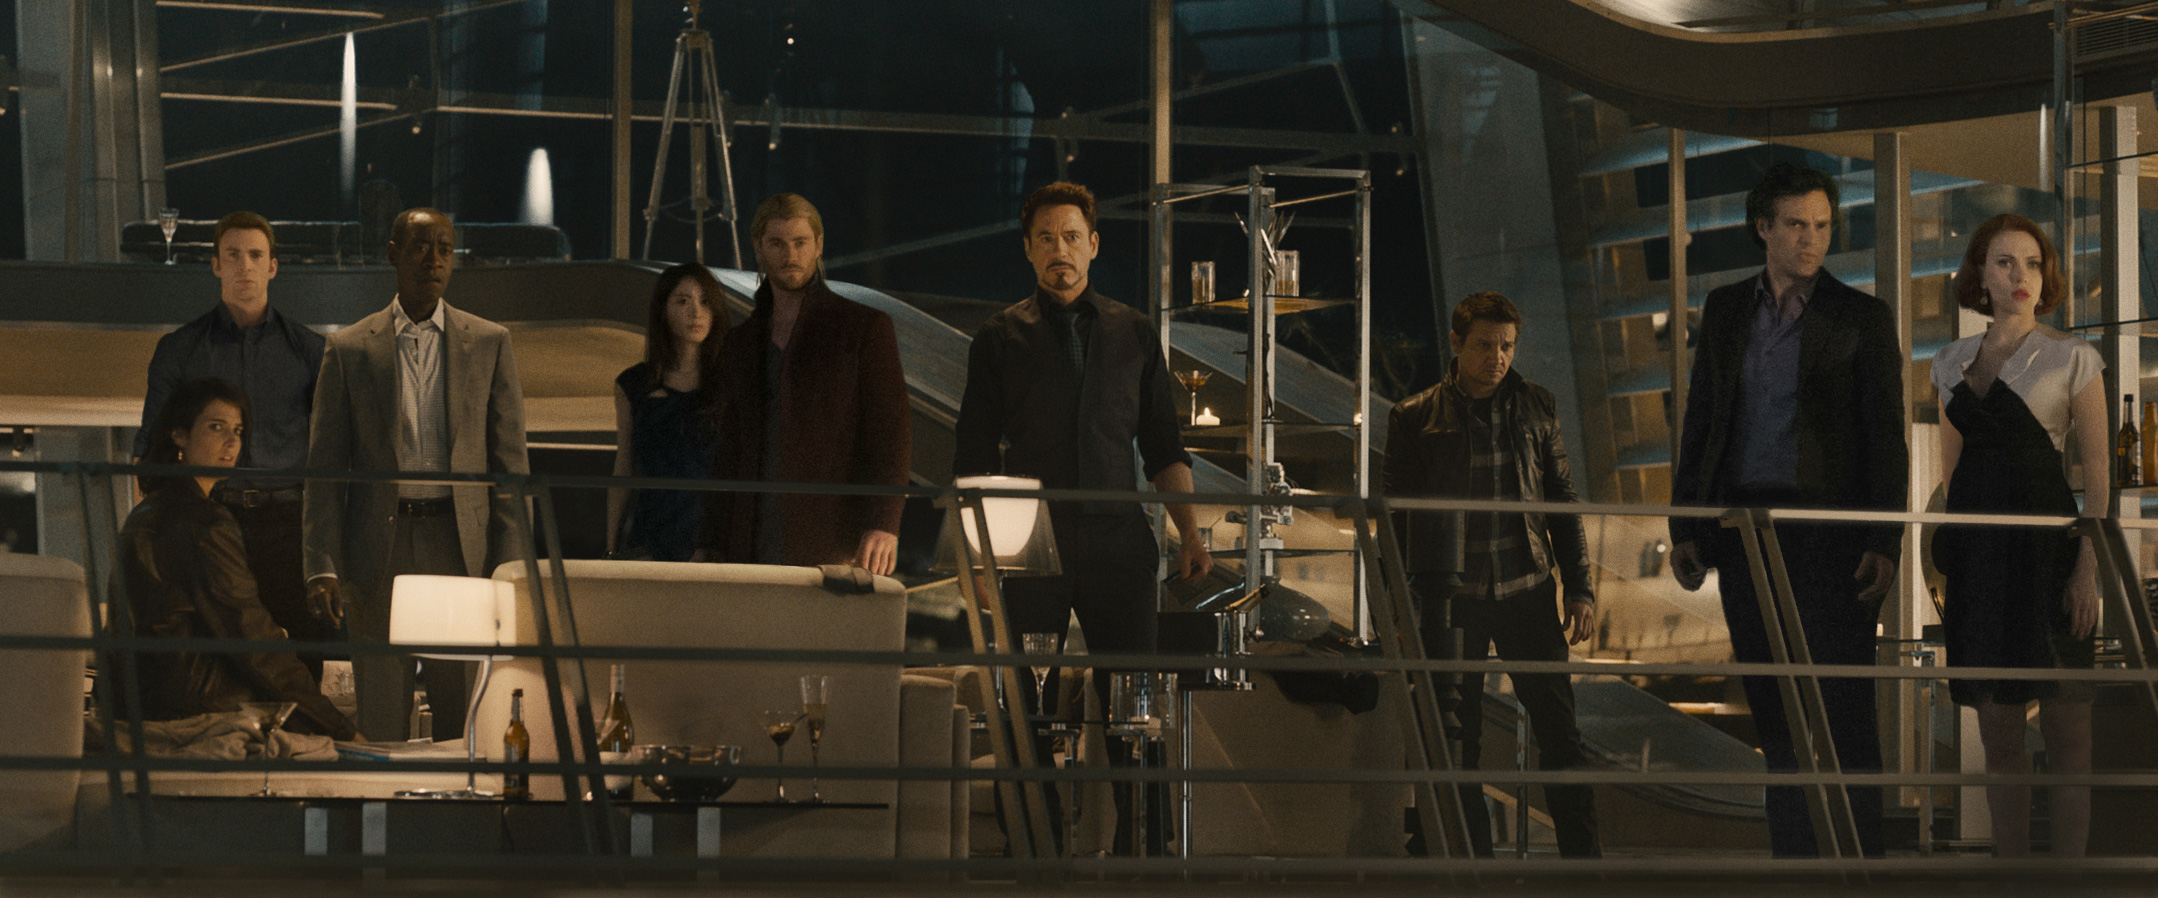 The Avengers, Avengers: Age of Ultron